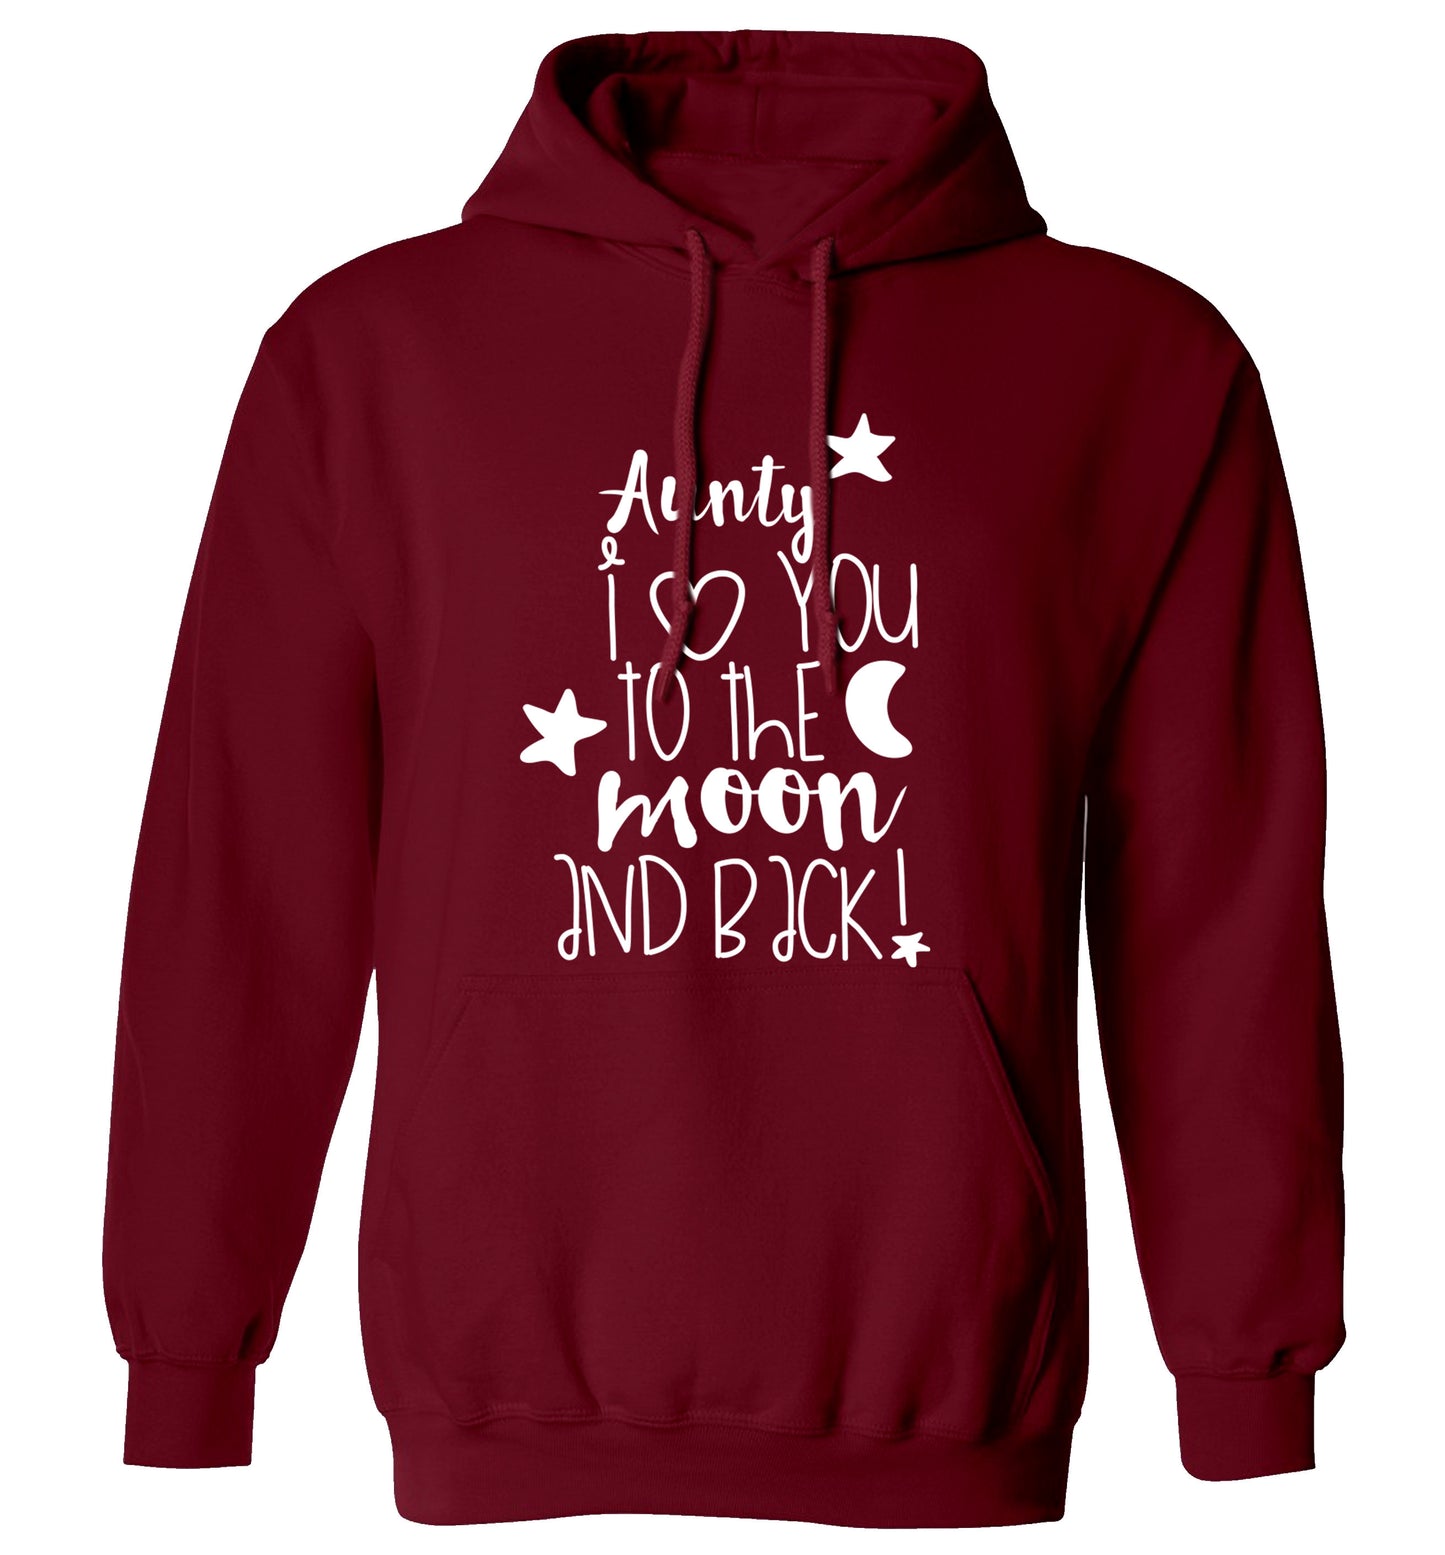 Aunty I love you to the moon and back adults unisex maroon hoodie 2XL